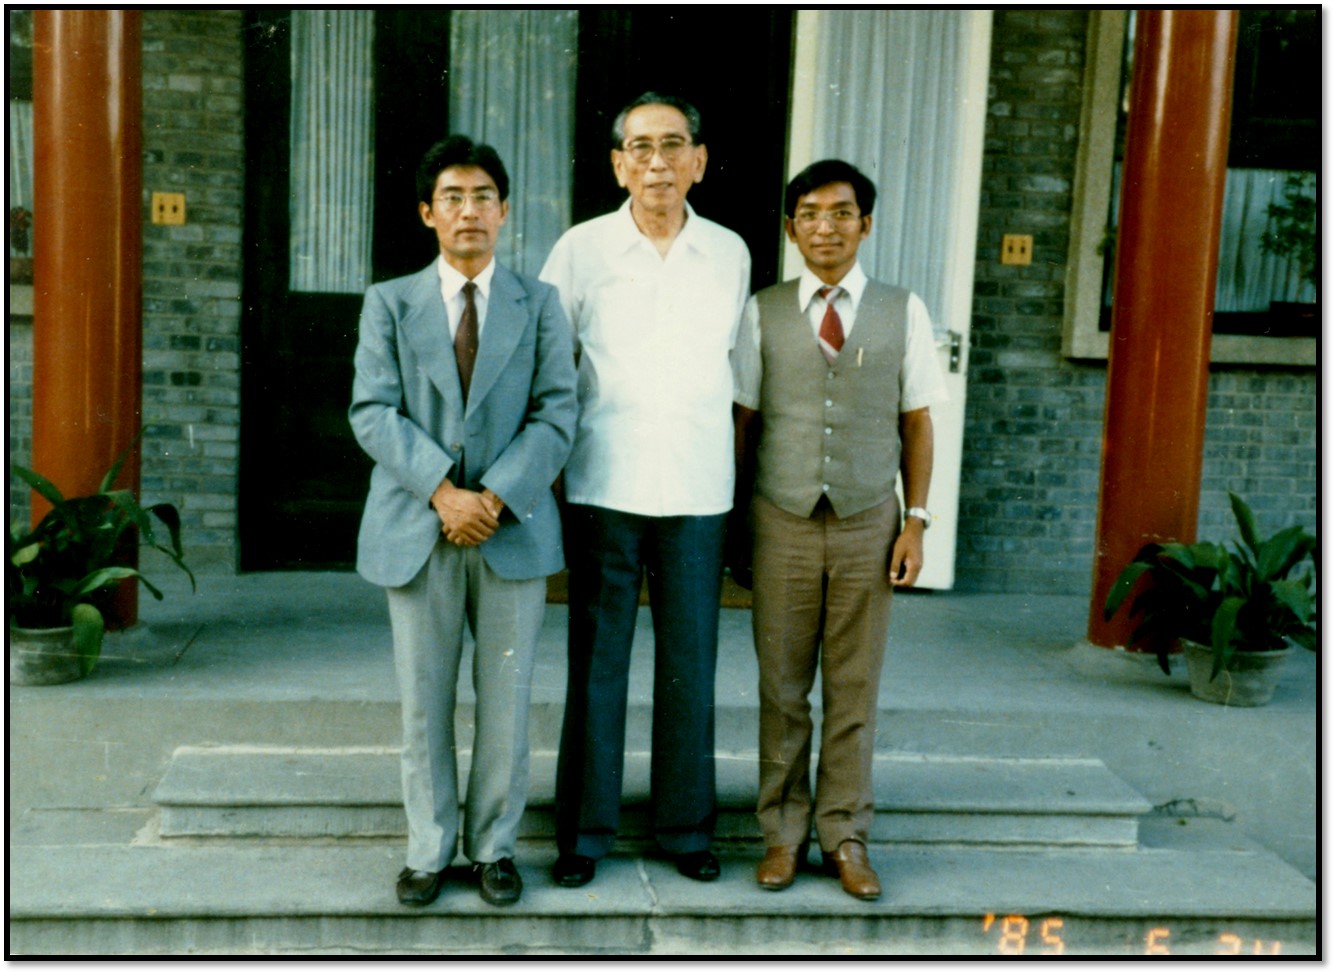 From left to right: Thubten Samphel (then Deputy Secretary, Information Office), Ngabo Ngawang Jigme, and Atisha Tenzin Phuntsok (then Research Officer, Information Office) during the Fourth Fact-finding delegation visit to Tibet led by Kundeling Woeser Gyaltsen (former Kalon), and others members include Alak Jigme Lhundup (General Secretary, Auditor General Office), Drawupon Rinchen Tsering (former ATPD member), and Kalden (former ATPD member) in 1985. Photo / Thubten Samphel / Director of the Tibet Policy Institute of the Central Tibetan Administration